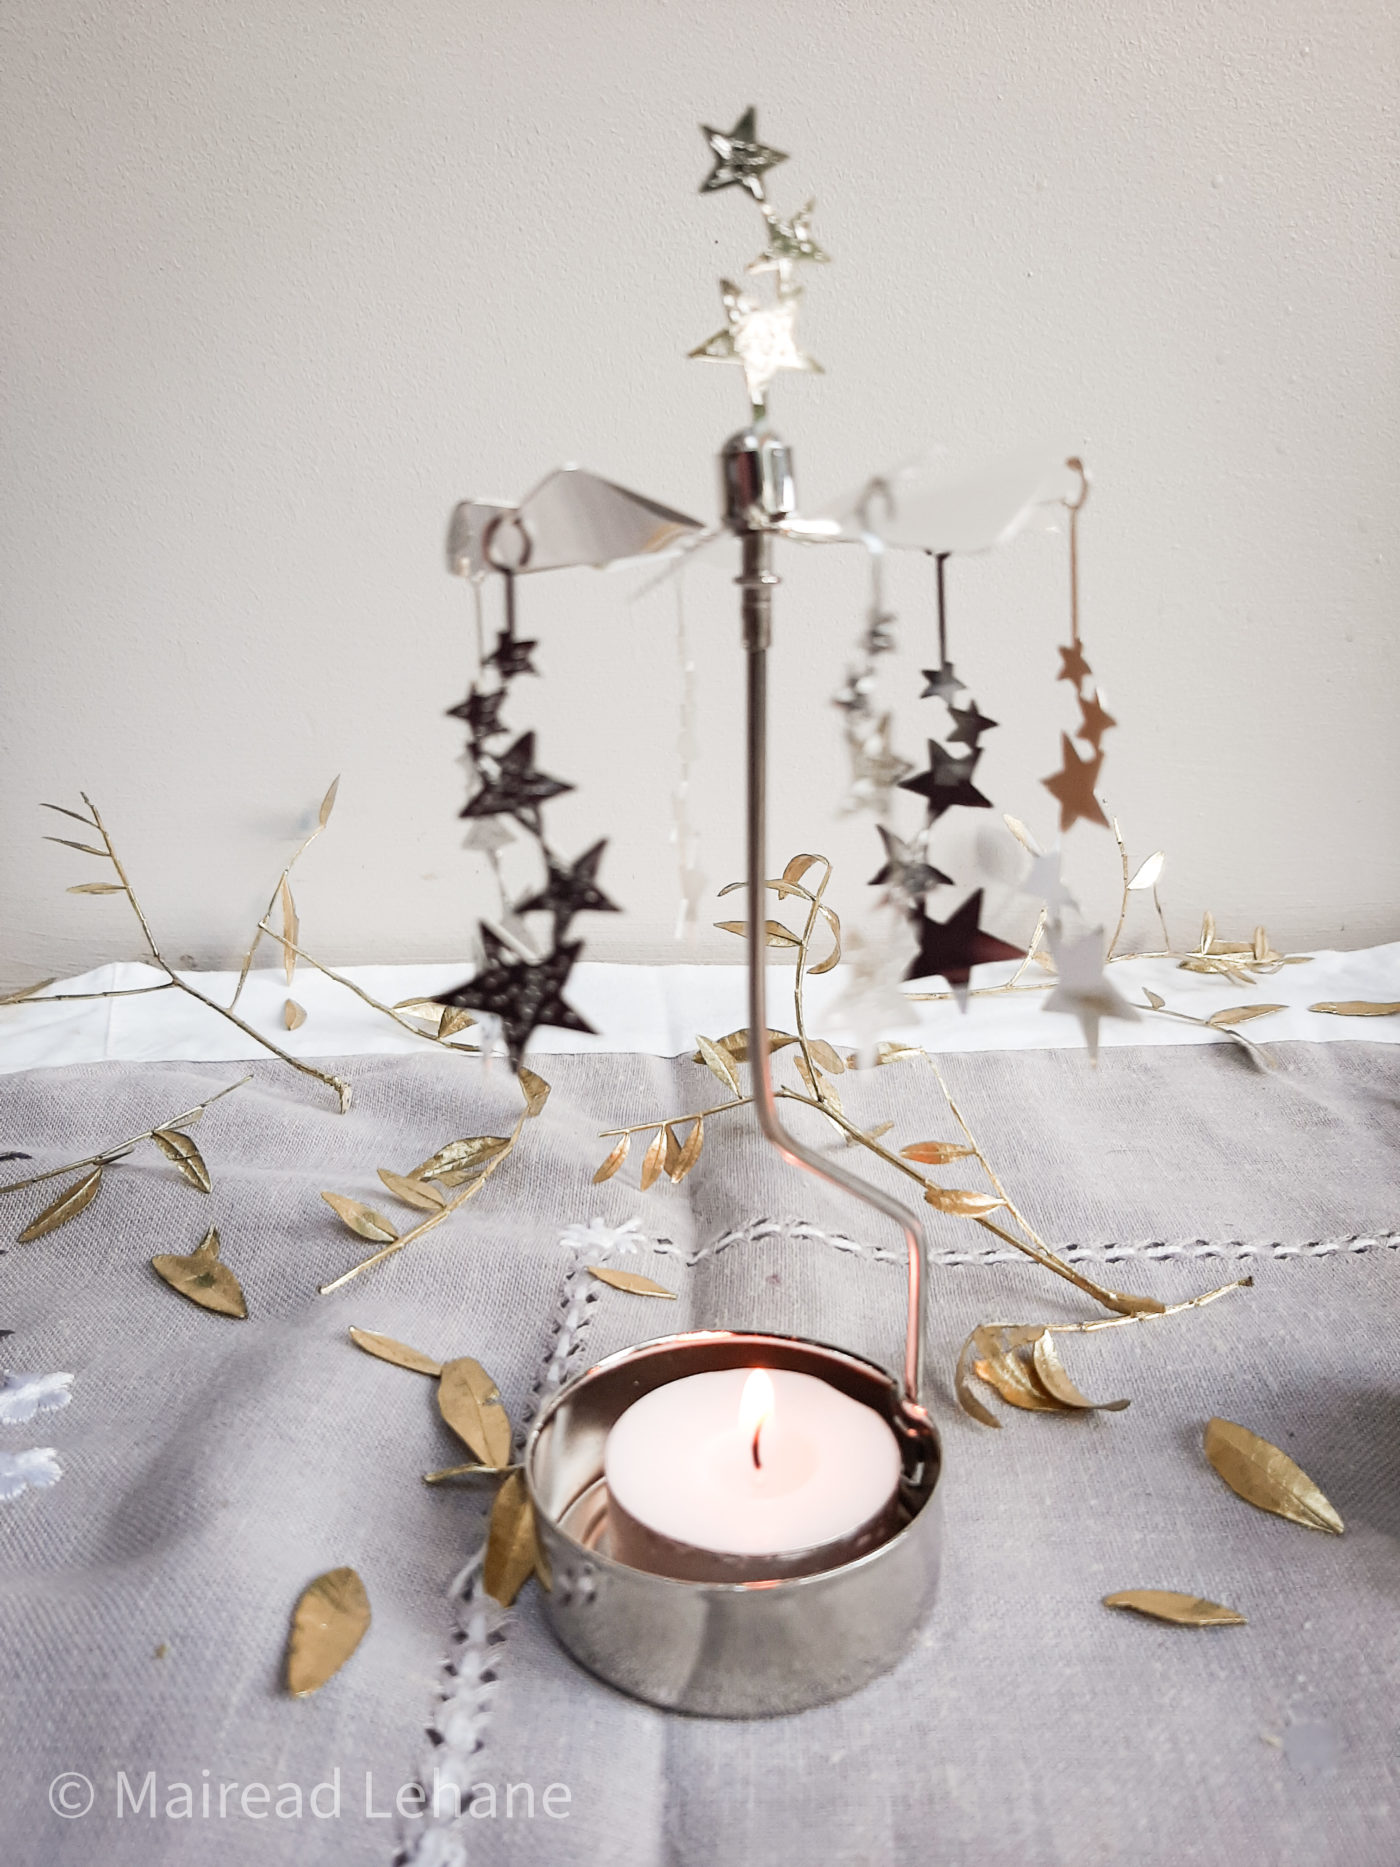 rotating candle holder with rows of stars on a spinner which rotate when the candle is lighting